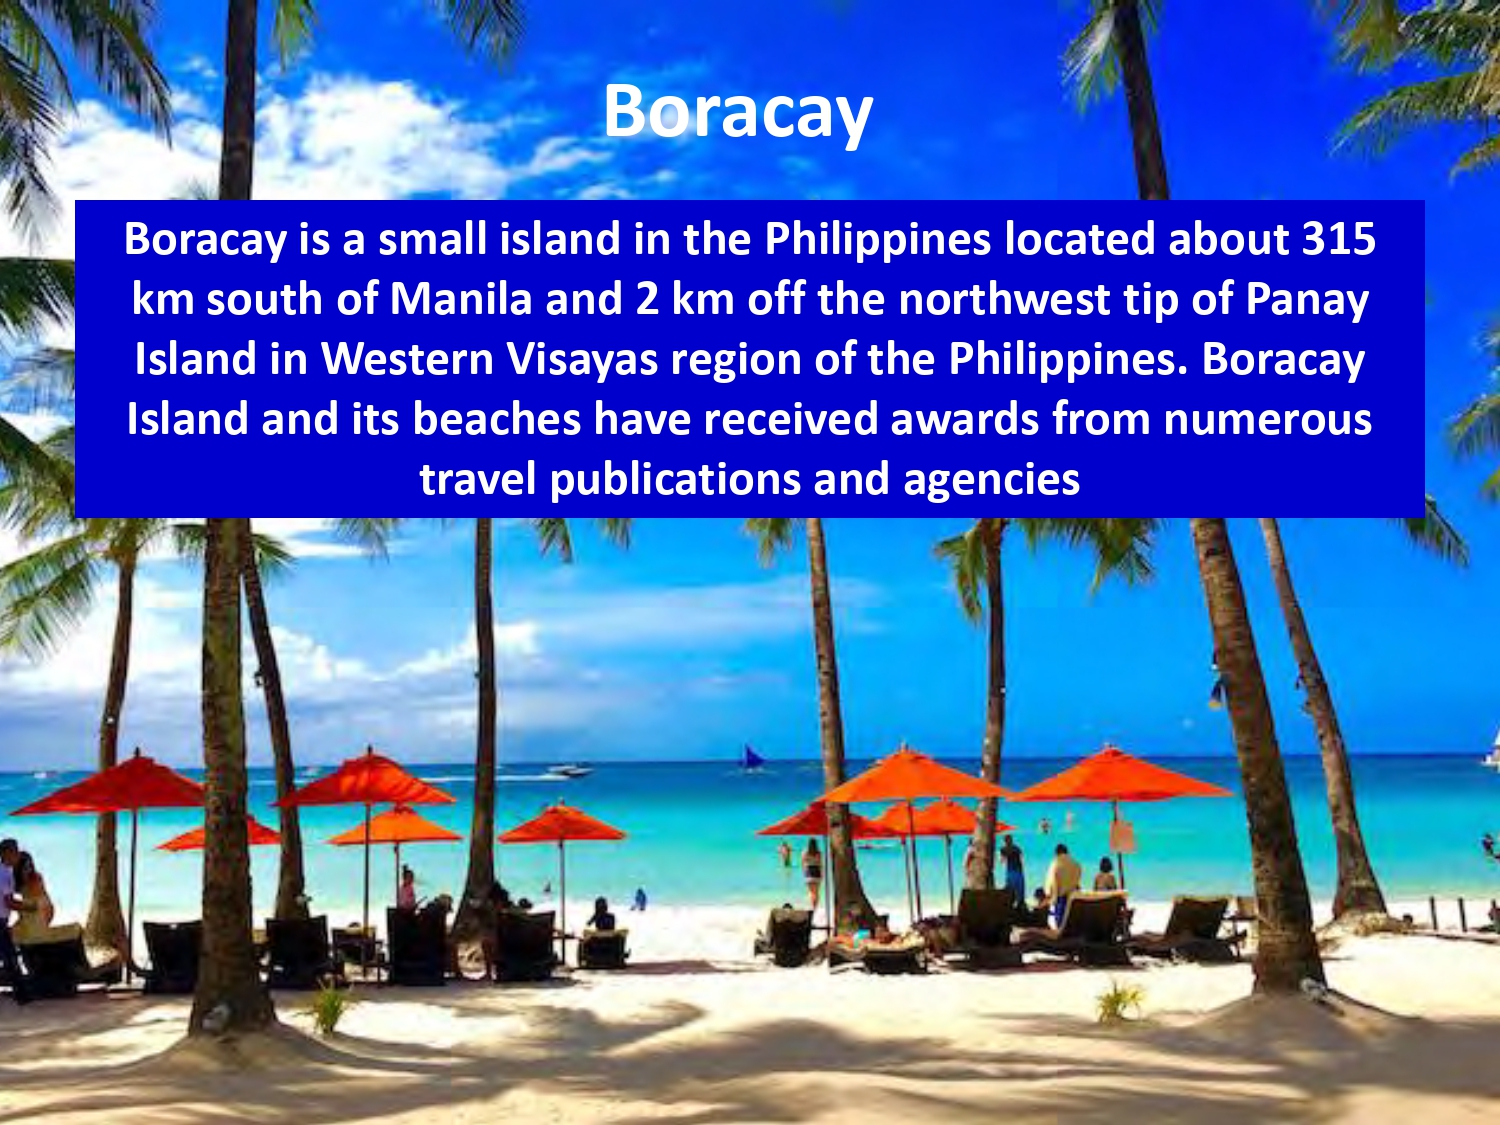 Boracay is a small island in the Philippines located about 315 km south of Manila and 2 km off the northwest tip of Panay Island in Western Visayas region of the Philippines. Boracay Island and its beaches have received awards from numerous travel publications and agencies